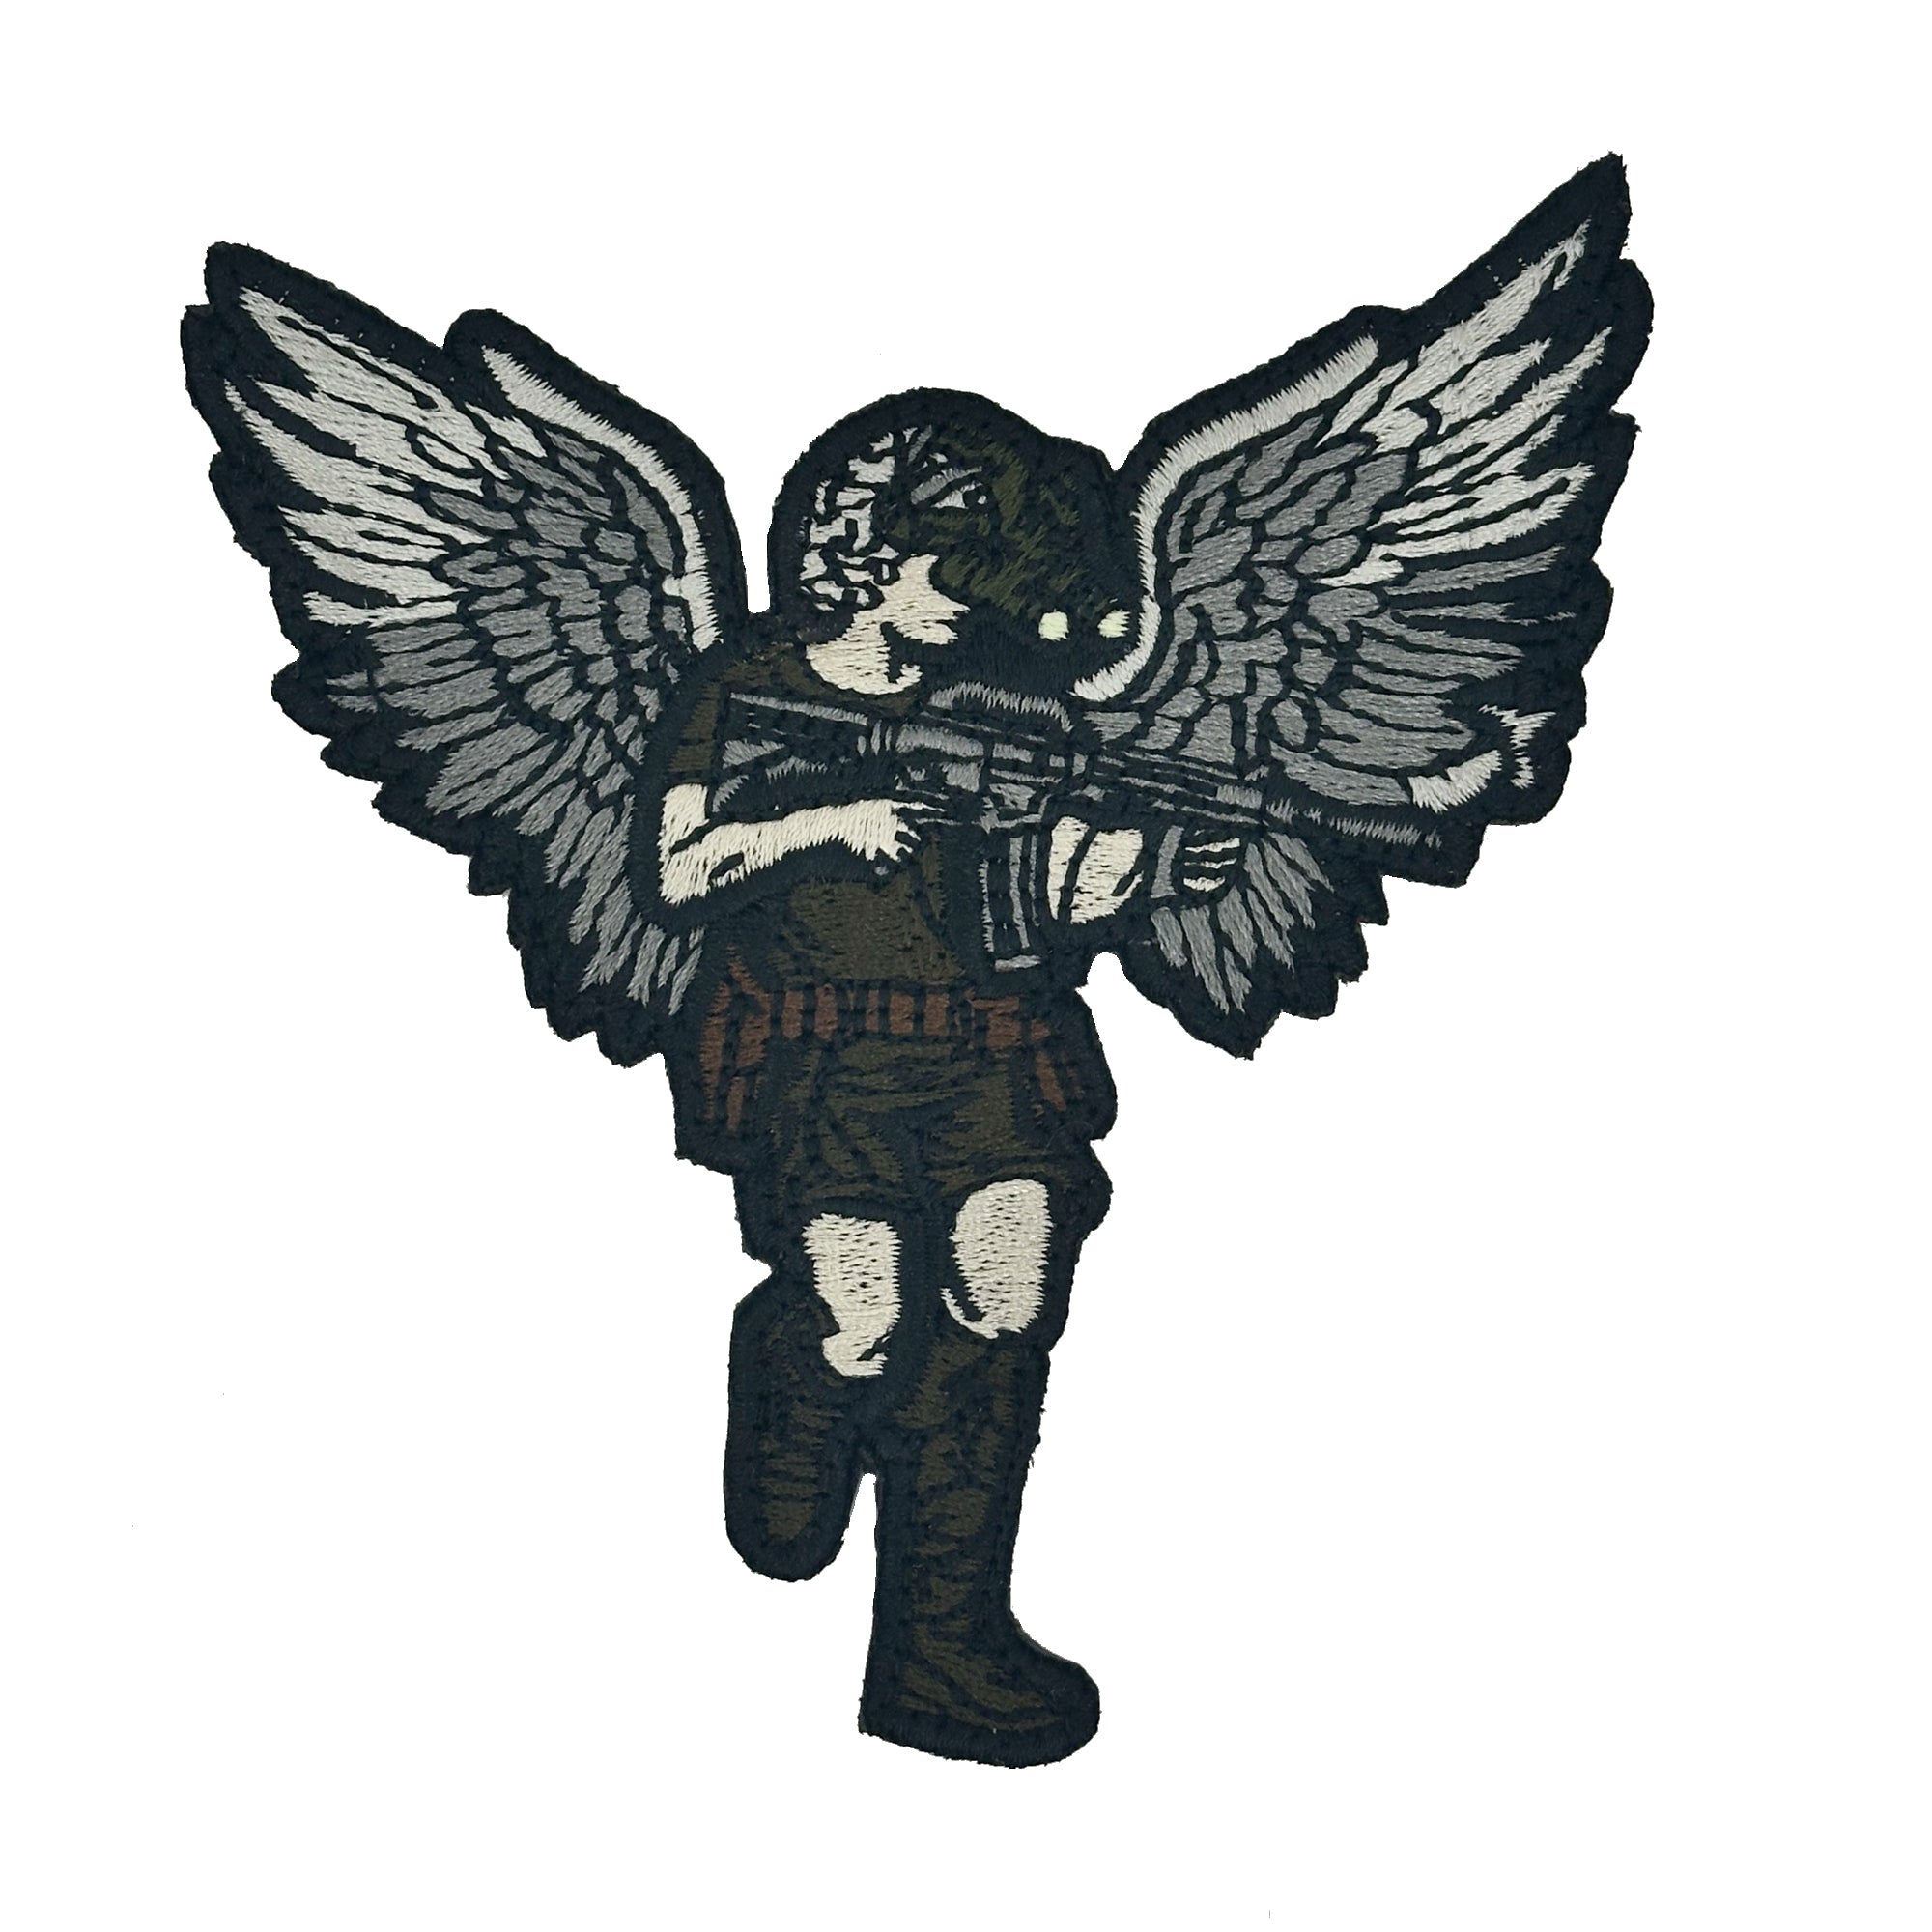 Tactical Cupid Cherub with AR-15 and Glow in the Dark Night Vision  - 4.25" inch Patch